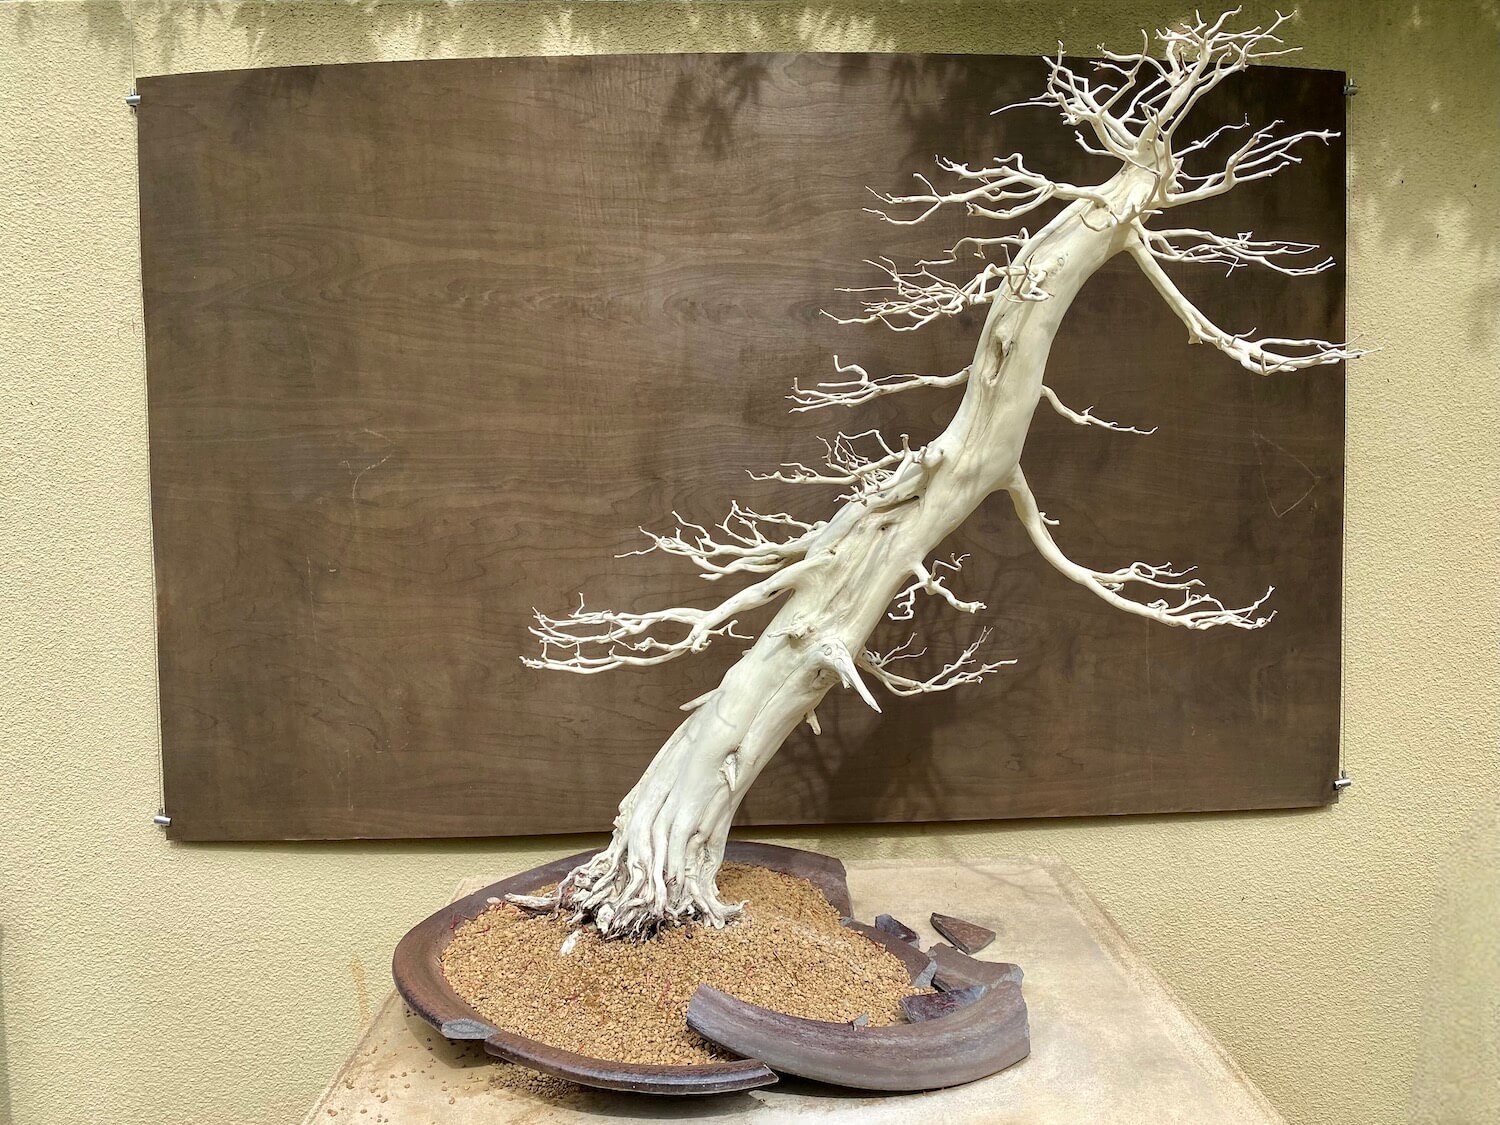 A dead miniature tree leans from out of a broken clay pot in a museum piece. The tree is white and several spindly branches line the trunk up and down.